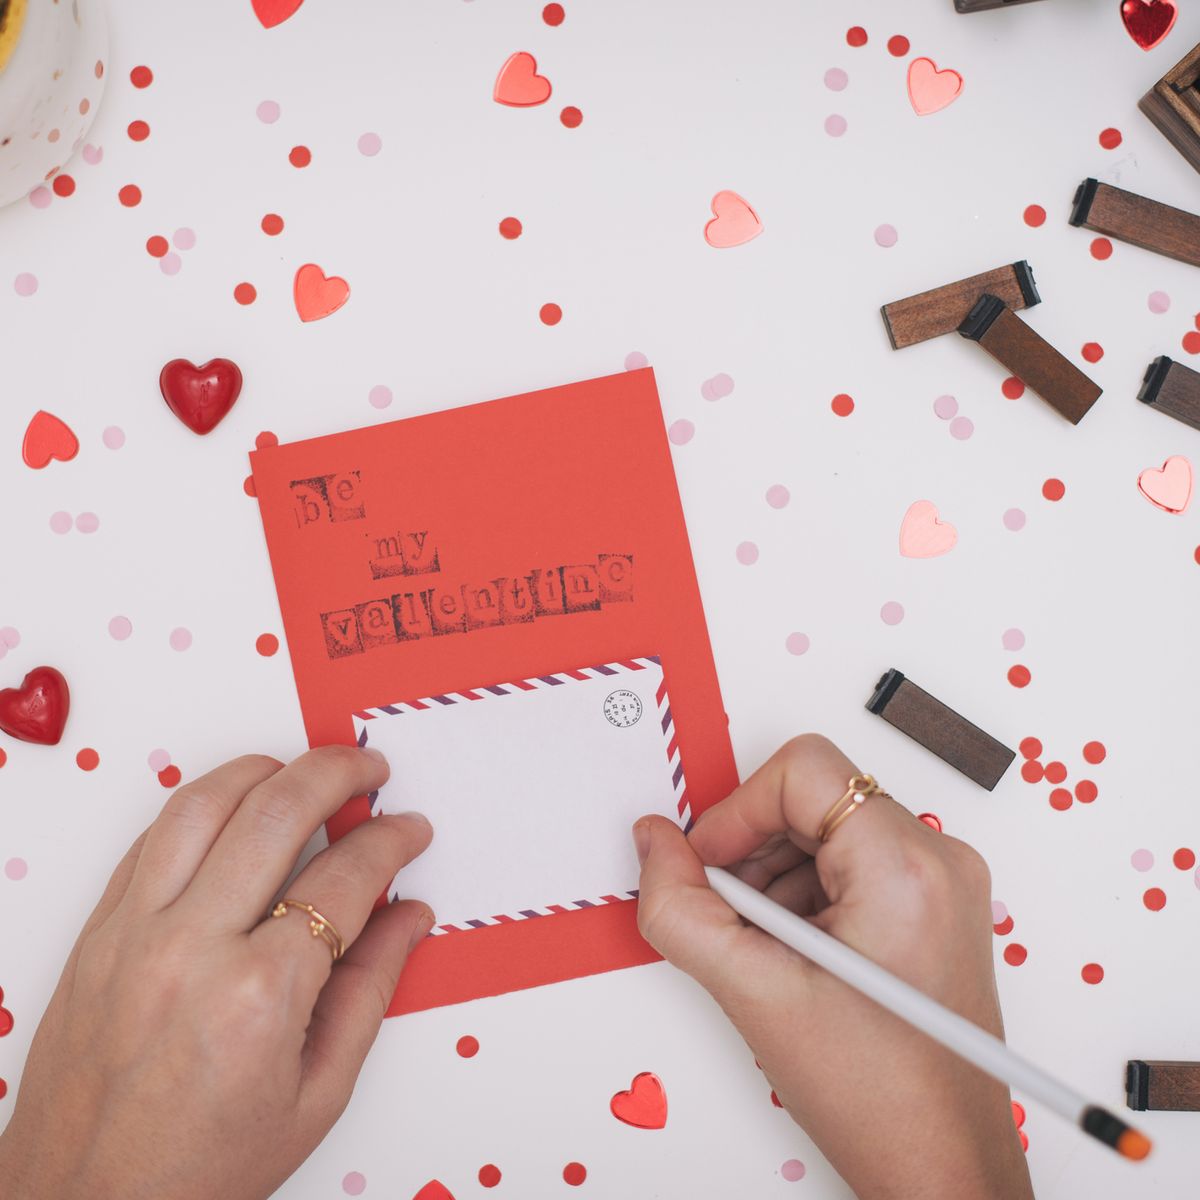 creative ways to write i love you on paper